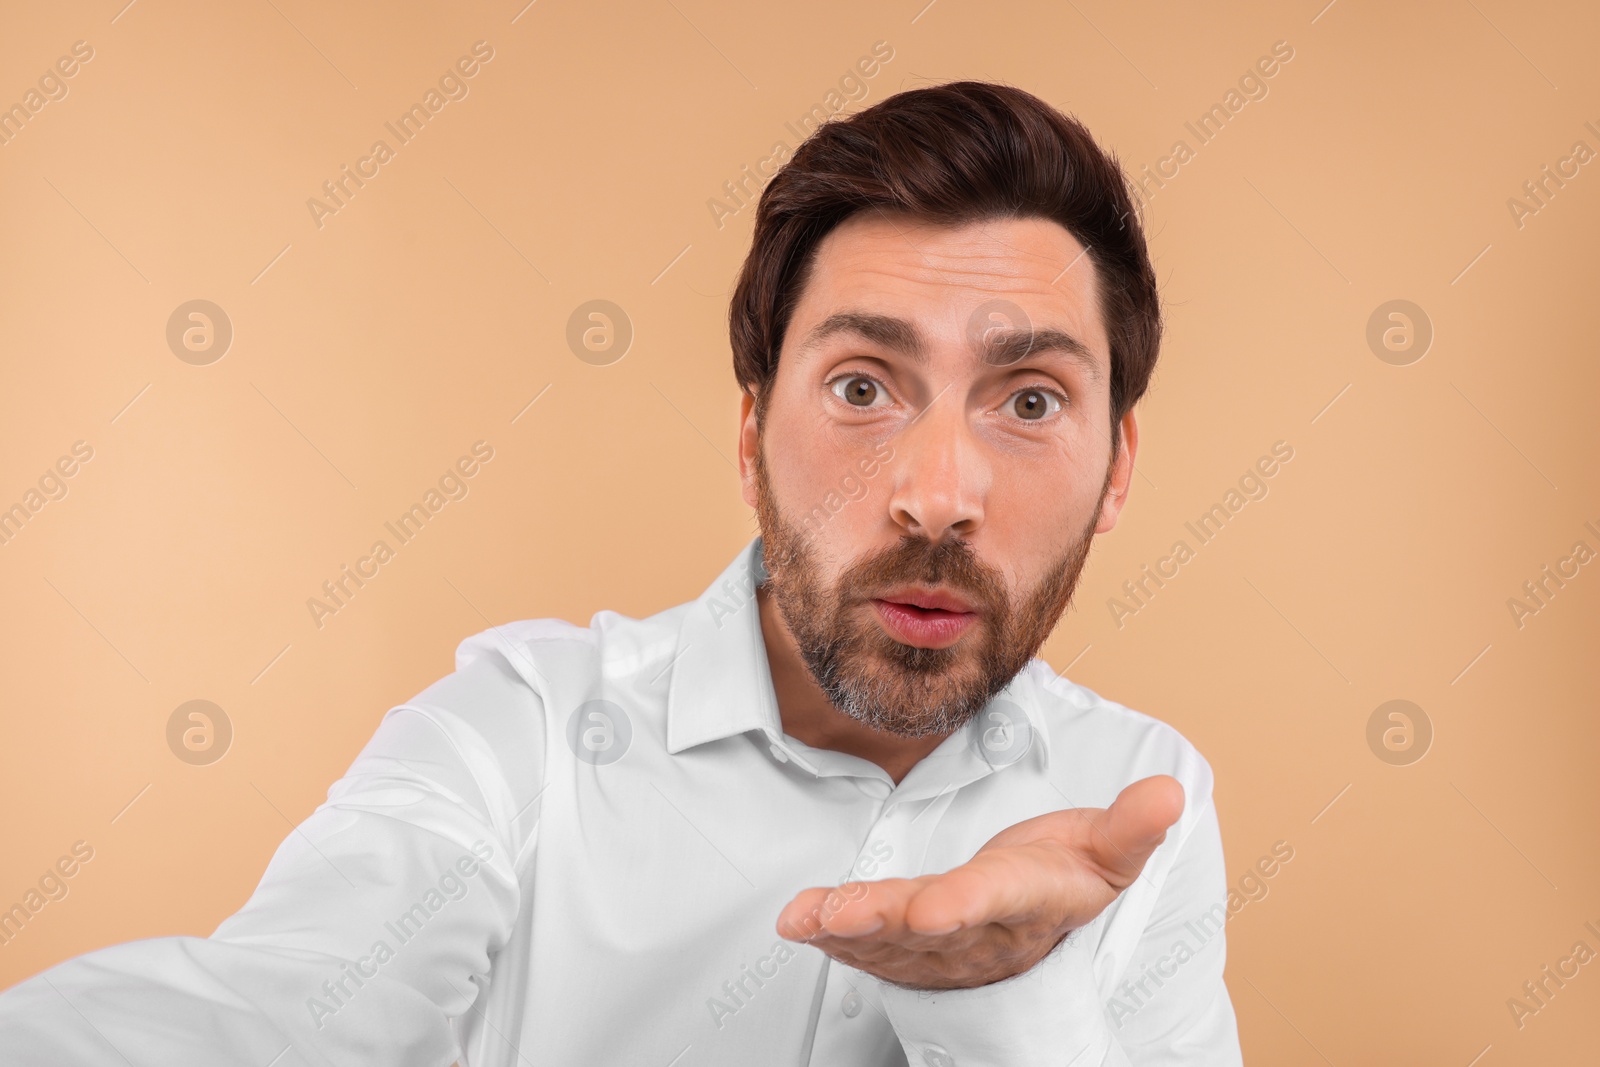 Photo of Bearded man taking selfie and blowing kiss beige background